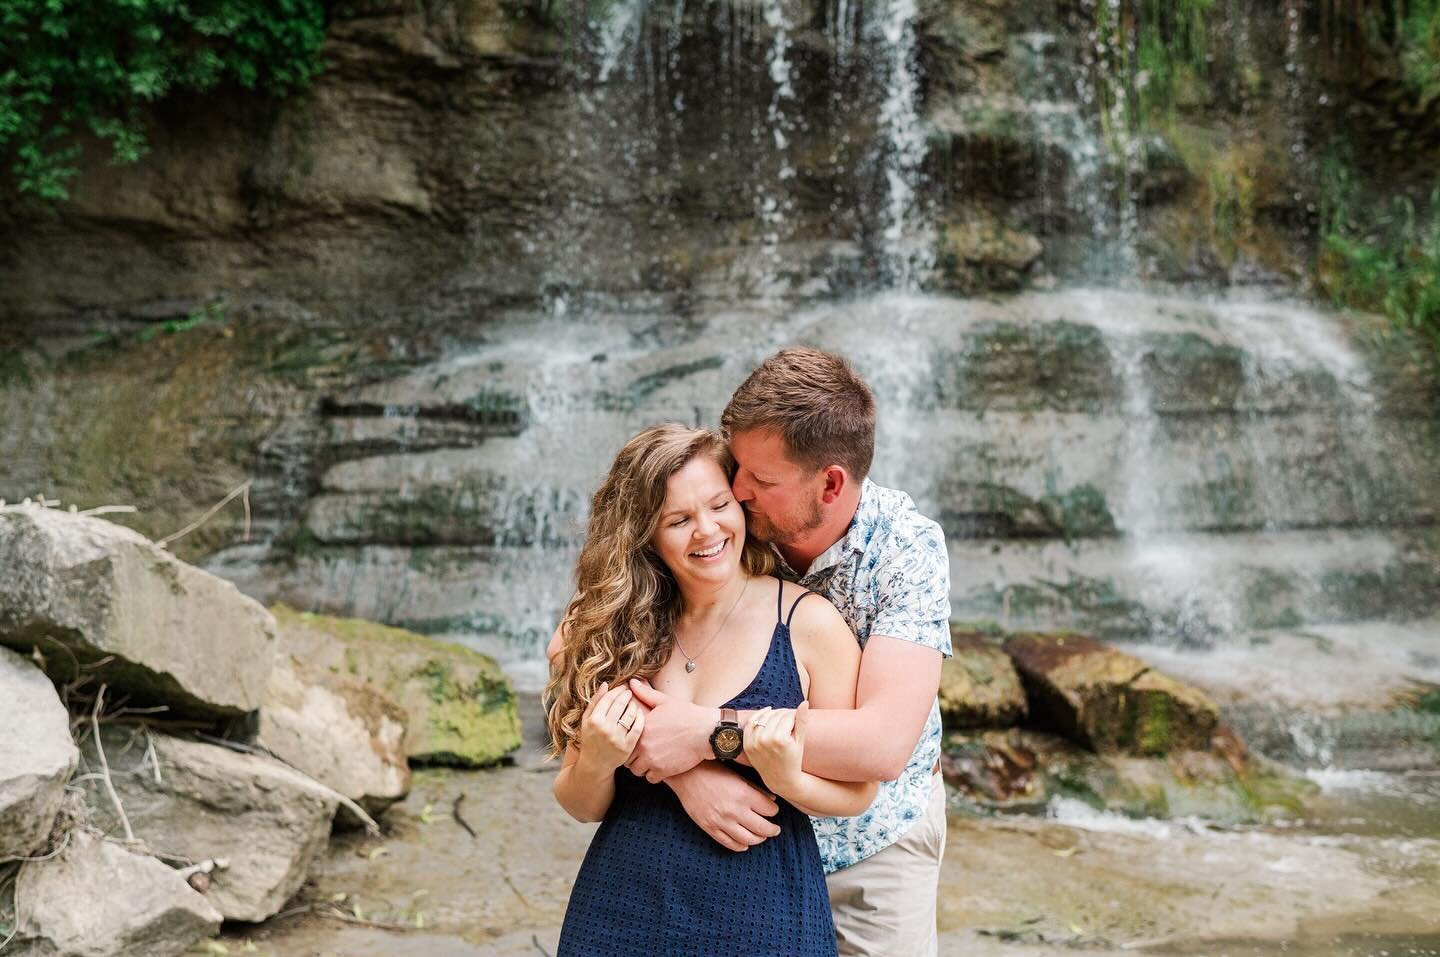 Counting down the days until the magic of wedding season begins! 🌸 

Starting off with Emily and Andrew&rsquo;s brunch wedding at the enchanting @cranberrycreekgardens in June. 💍 

Can&rsquo;t wait to capture all the love and laughter that fills th